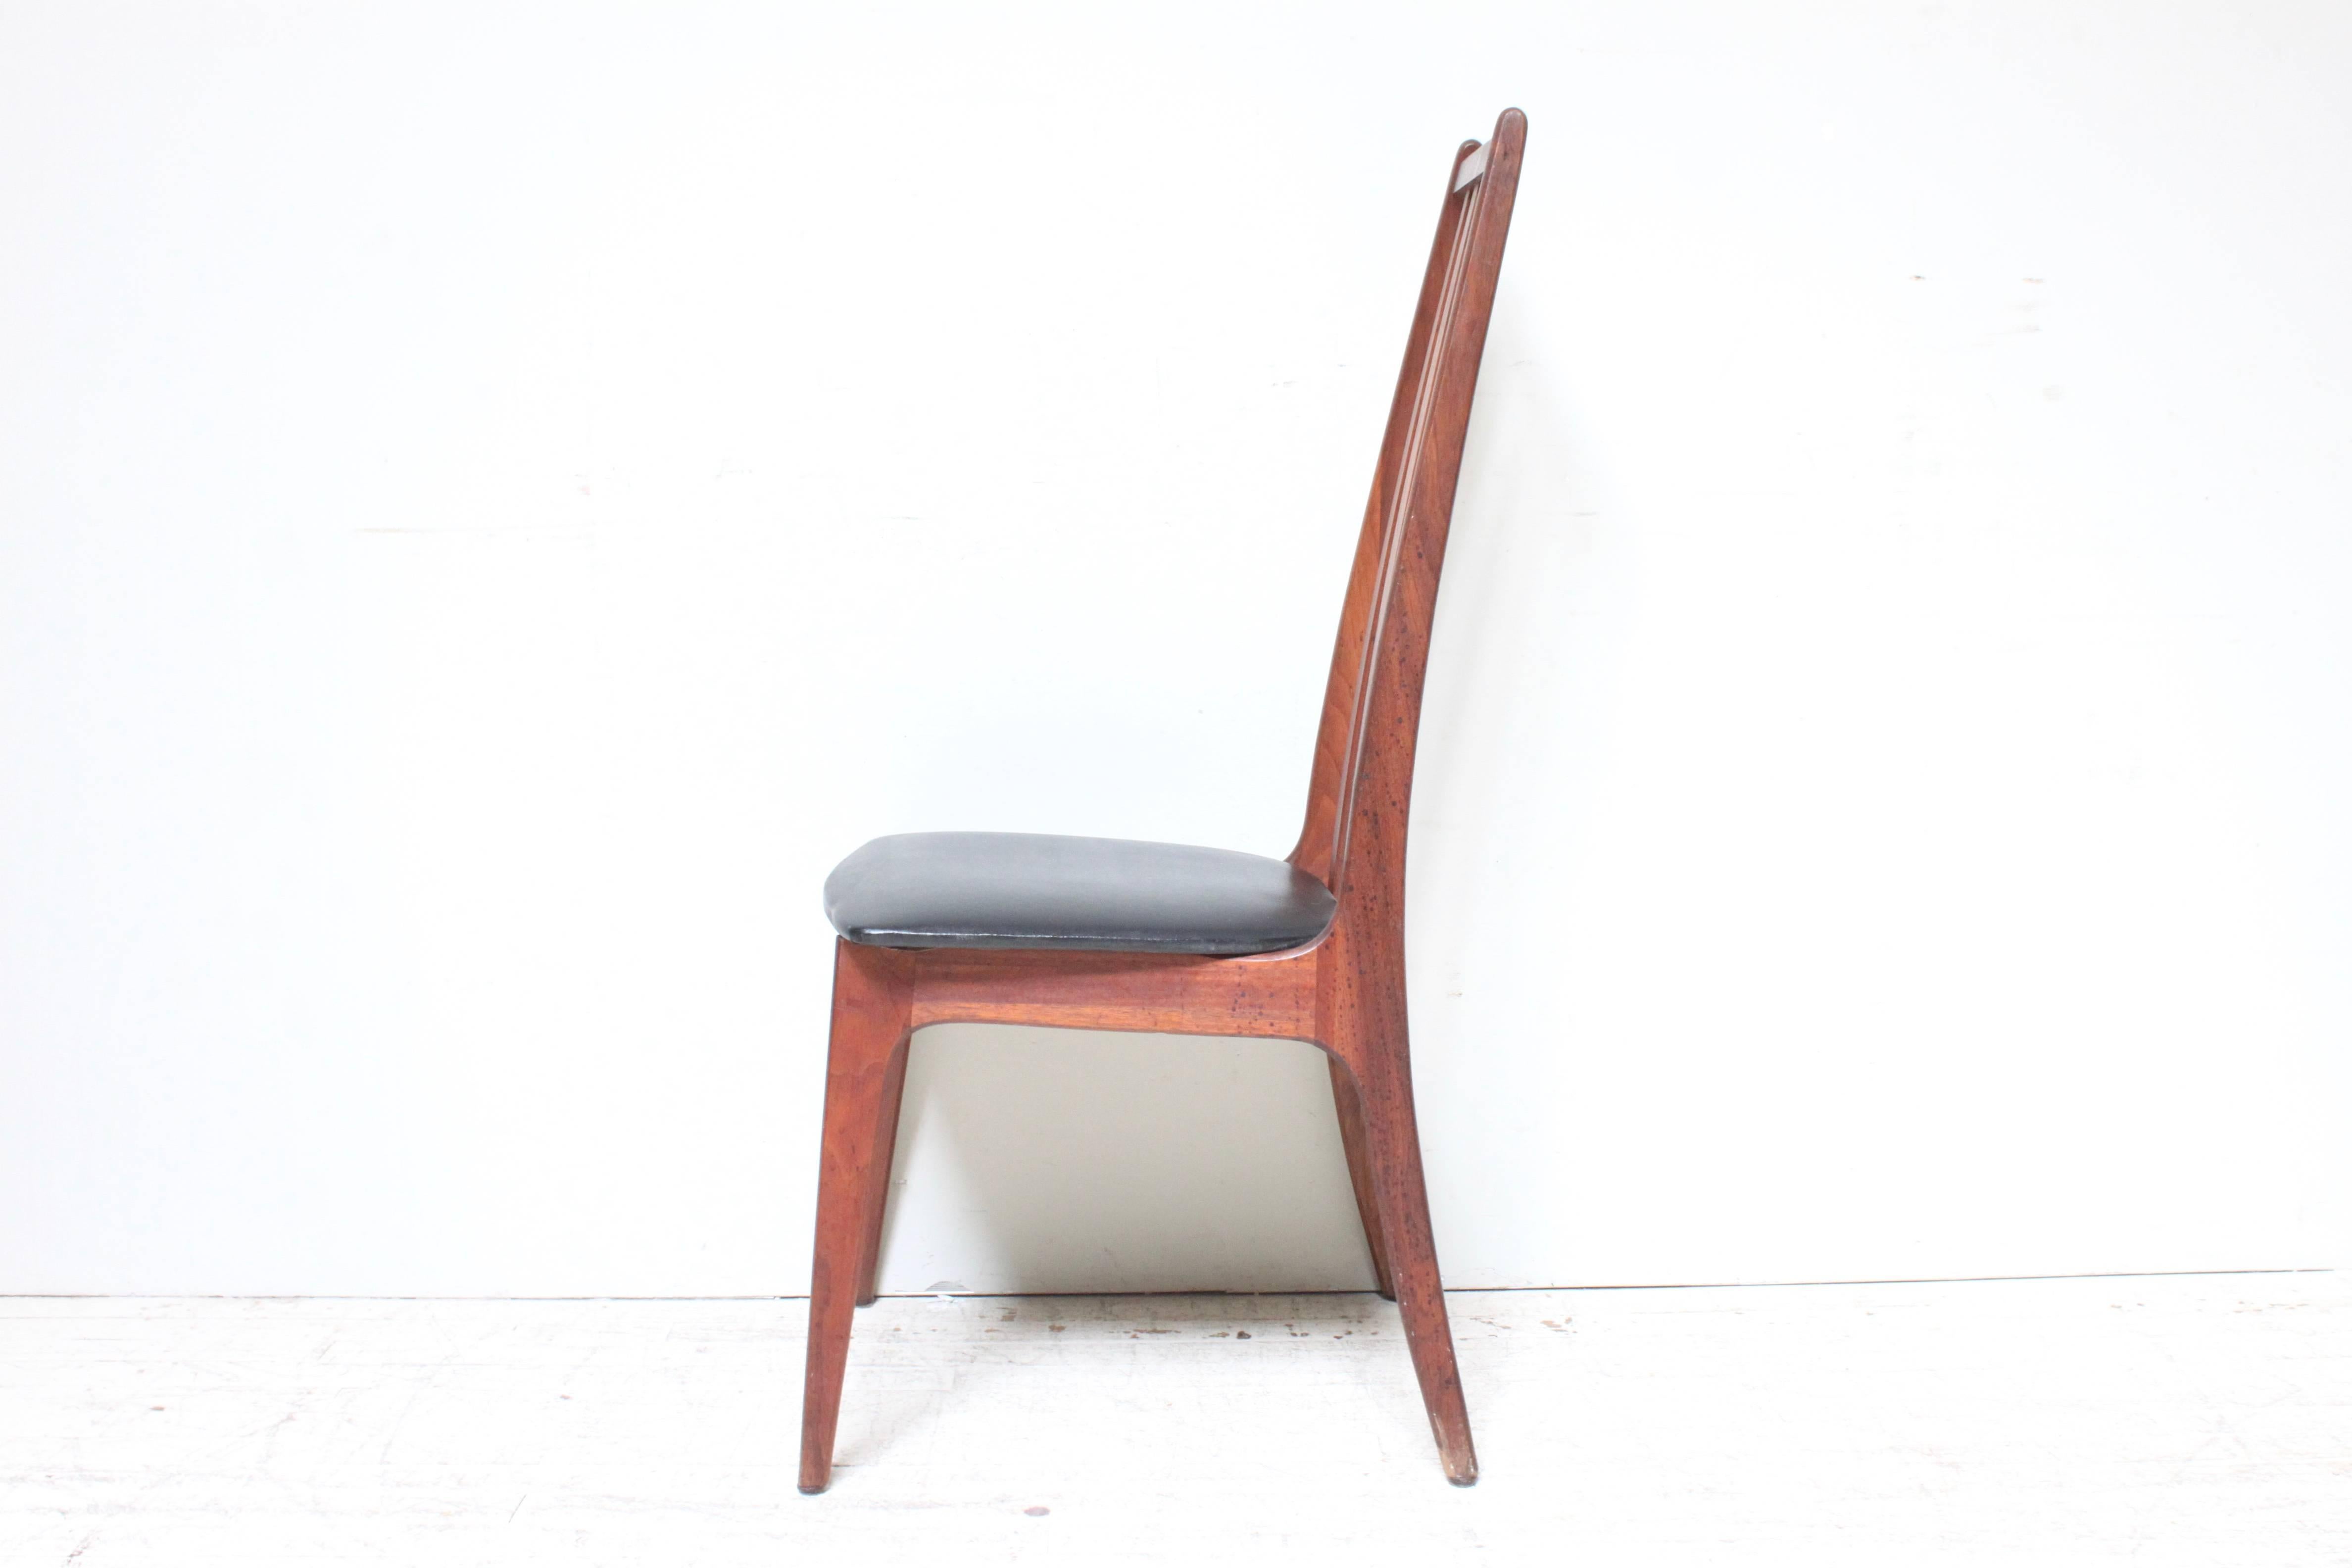 Beautiful walnut high back dining chair very often attributed to Adrian Pearsall. Original vinyl seat pad in good condition. Solid black Walnut frame is in good original condition as well.